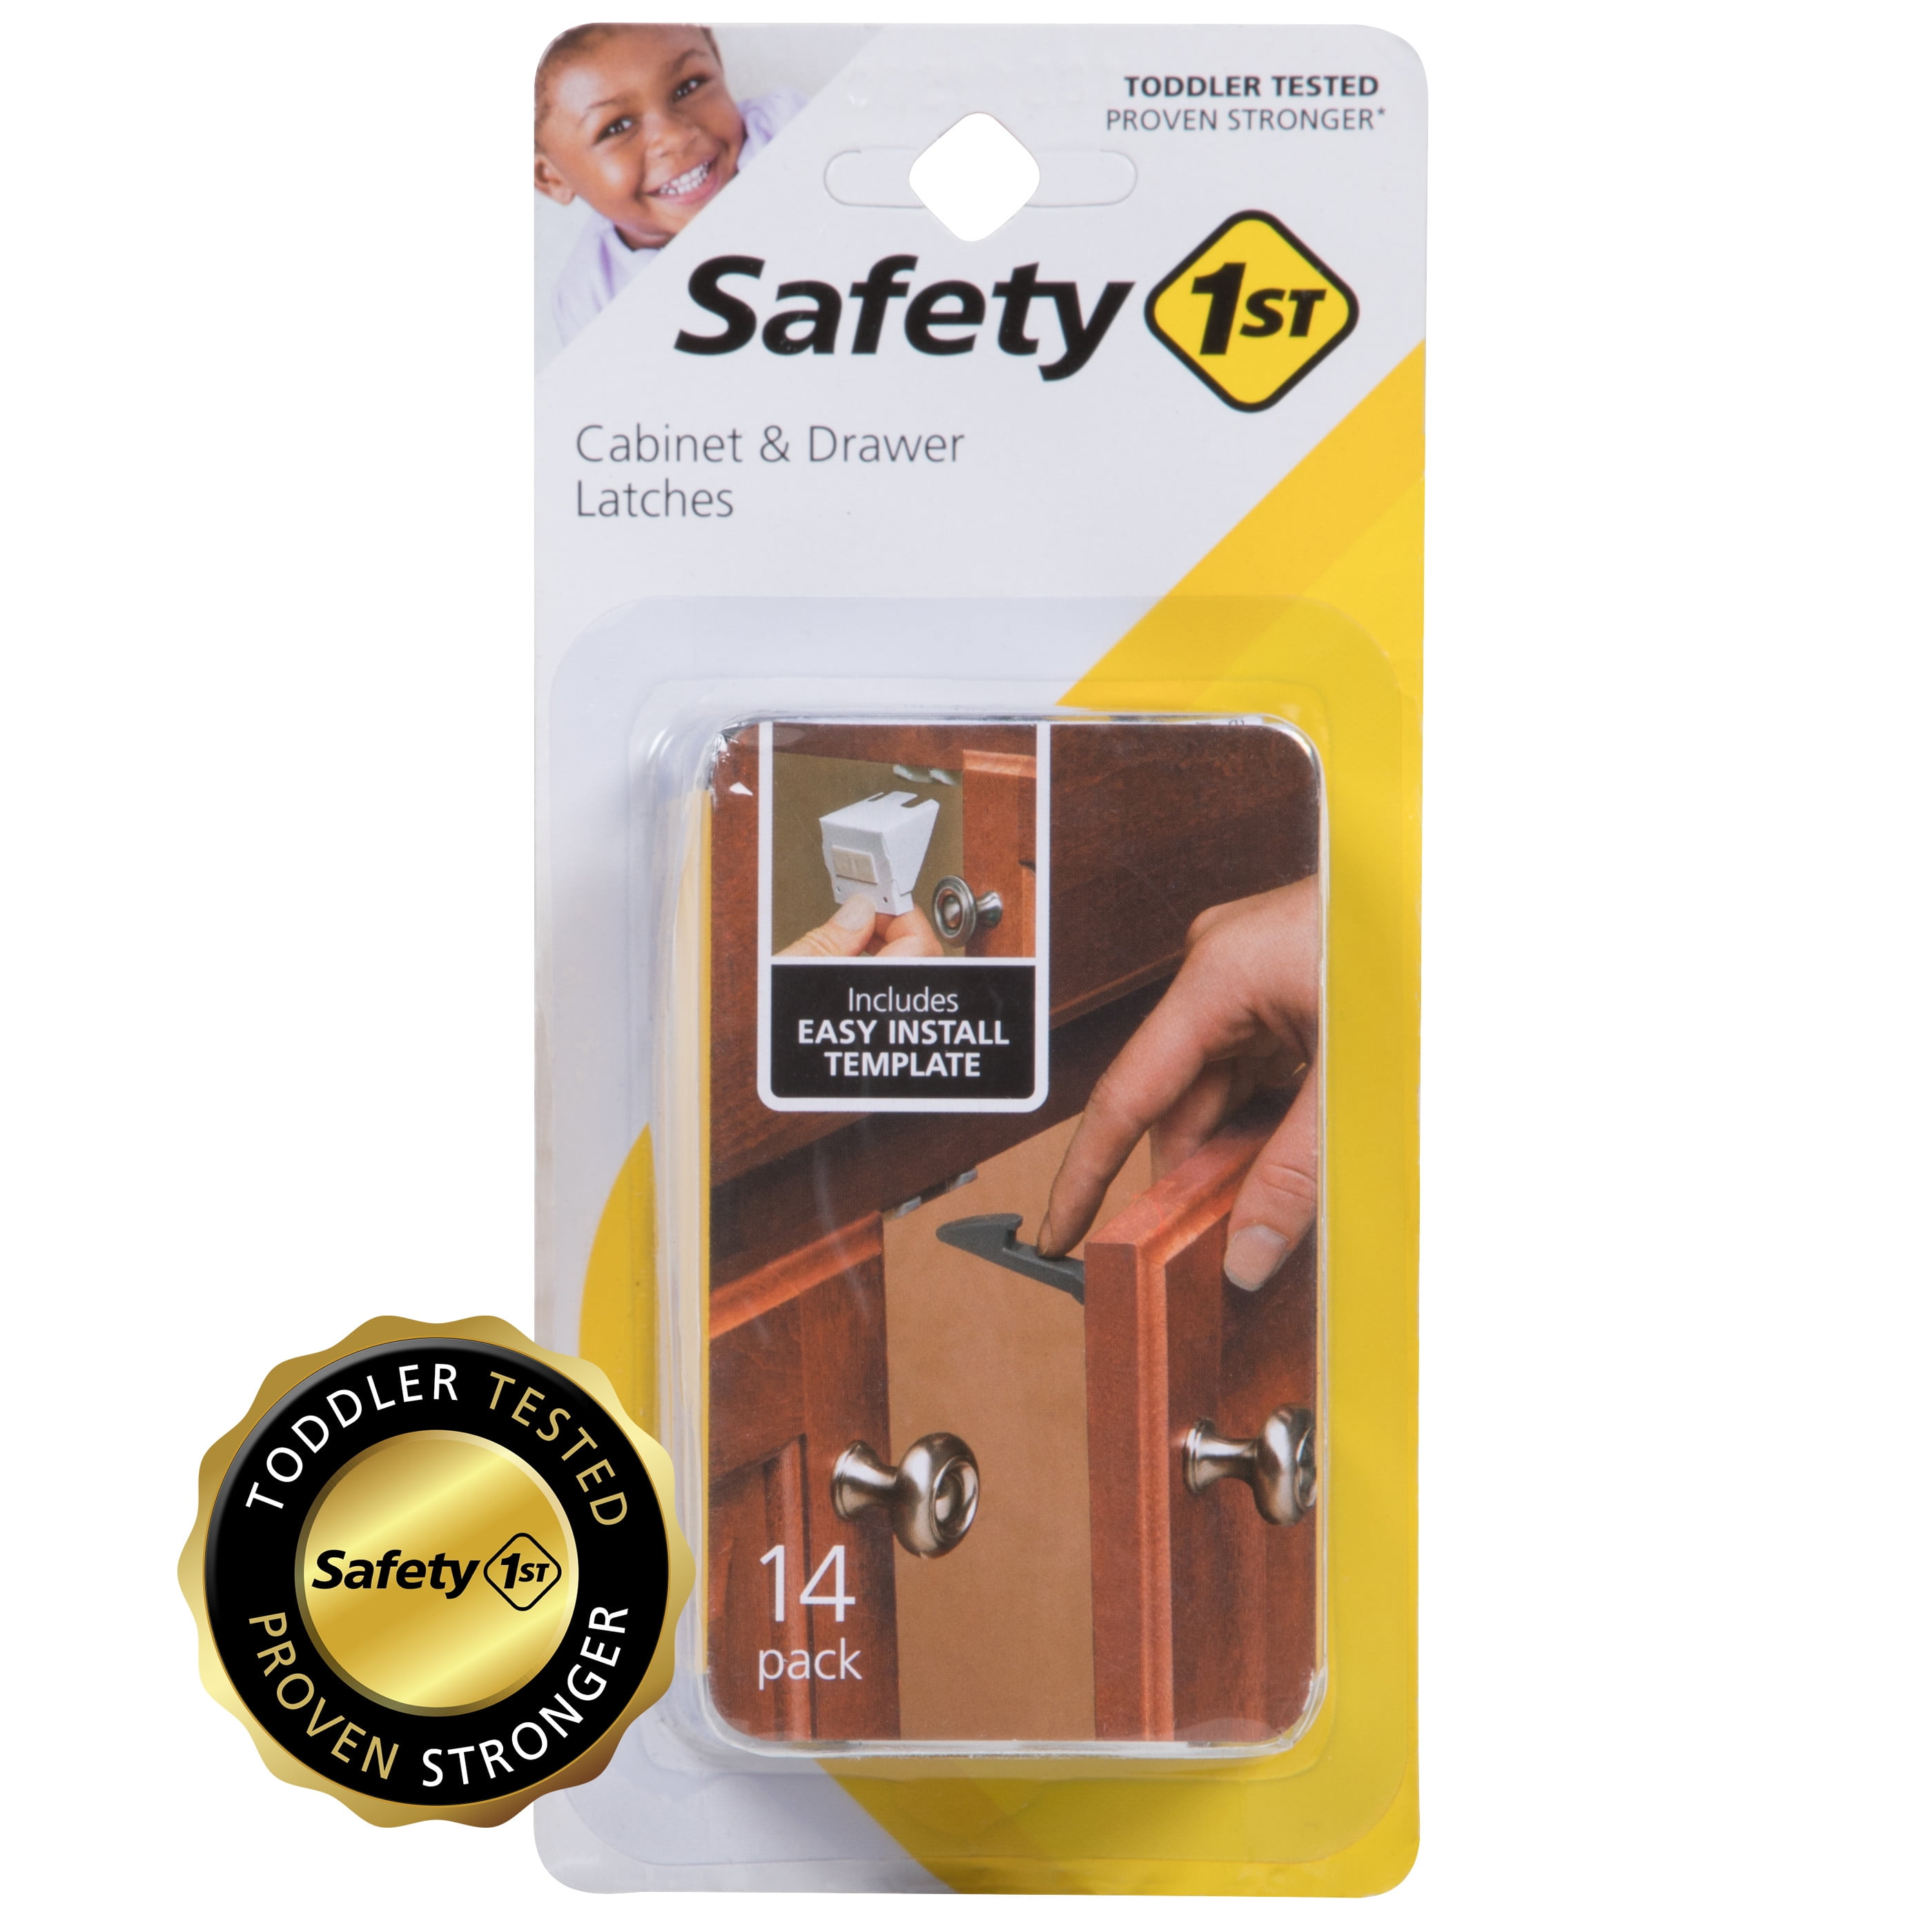 Baby Proof Cabinet Latches (2 Pack) Childproof Drawer Latches with